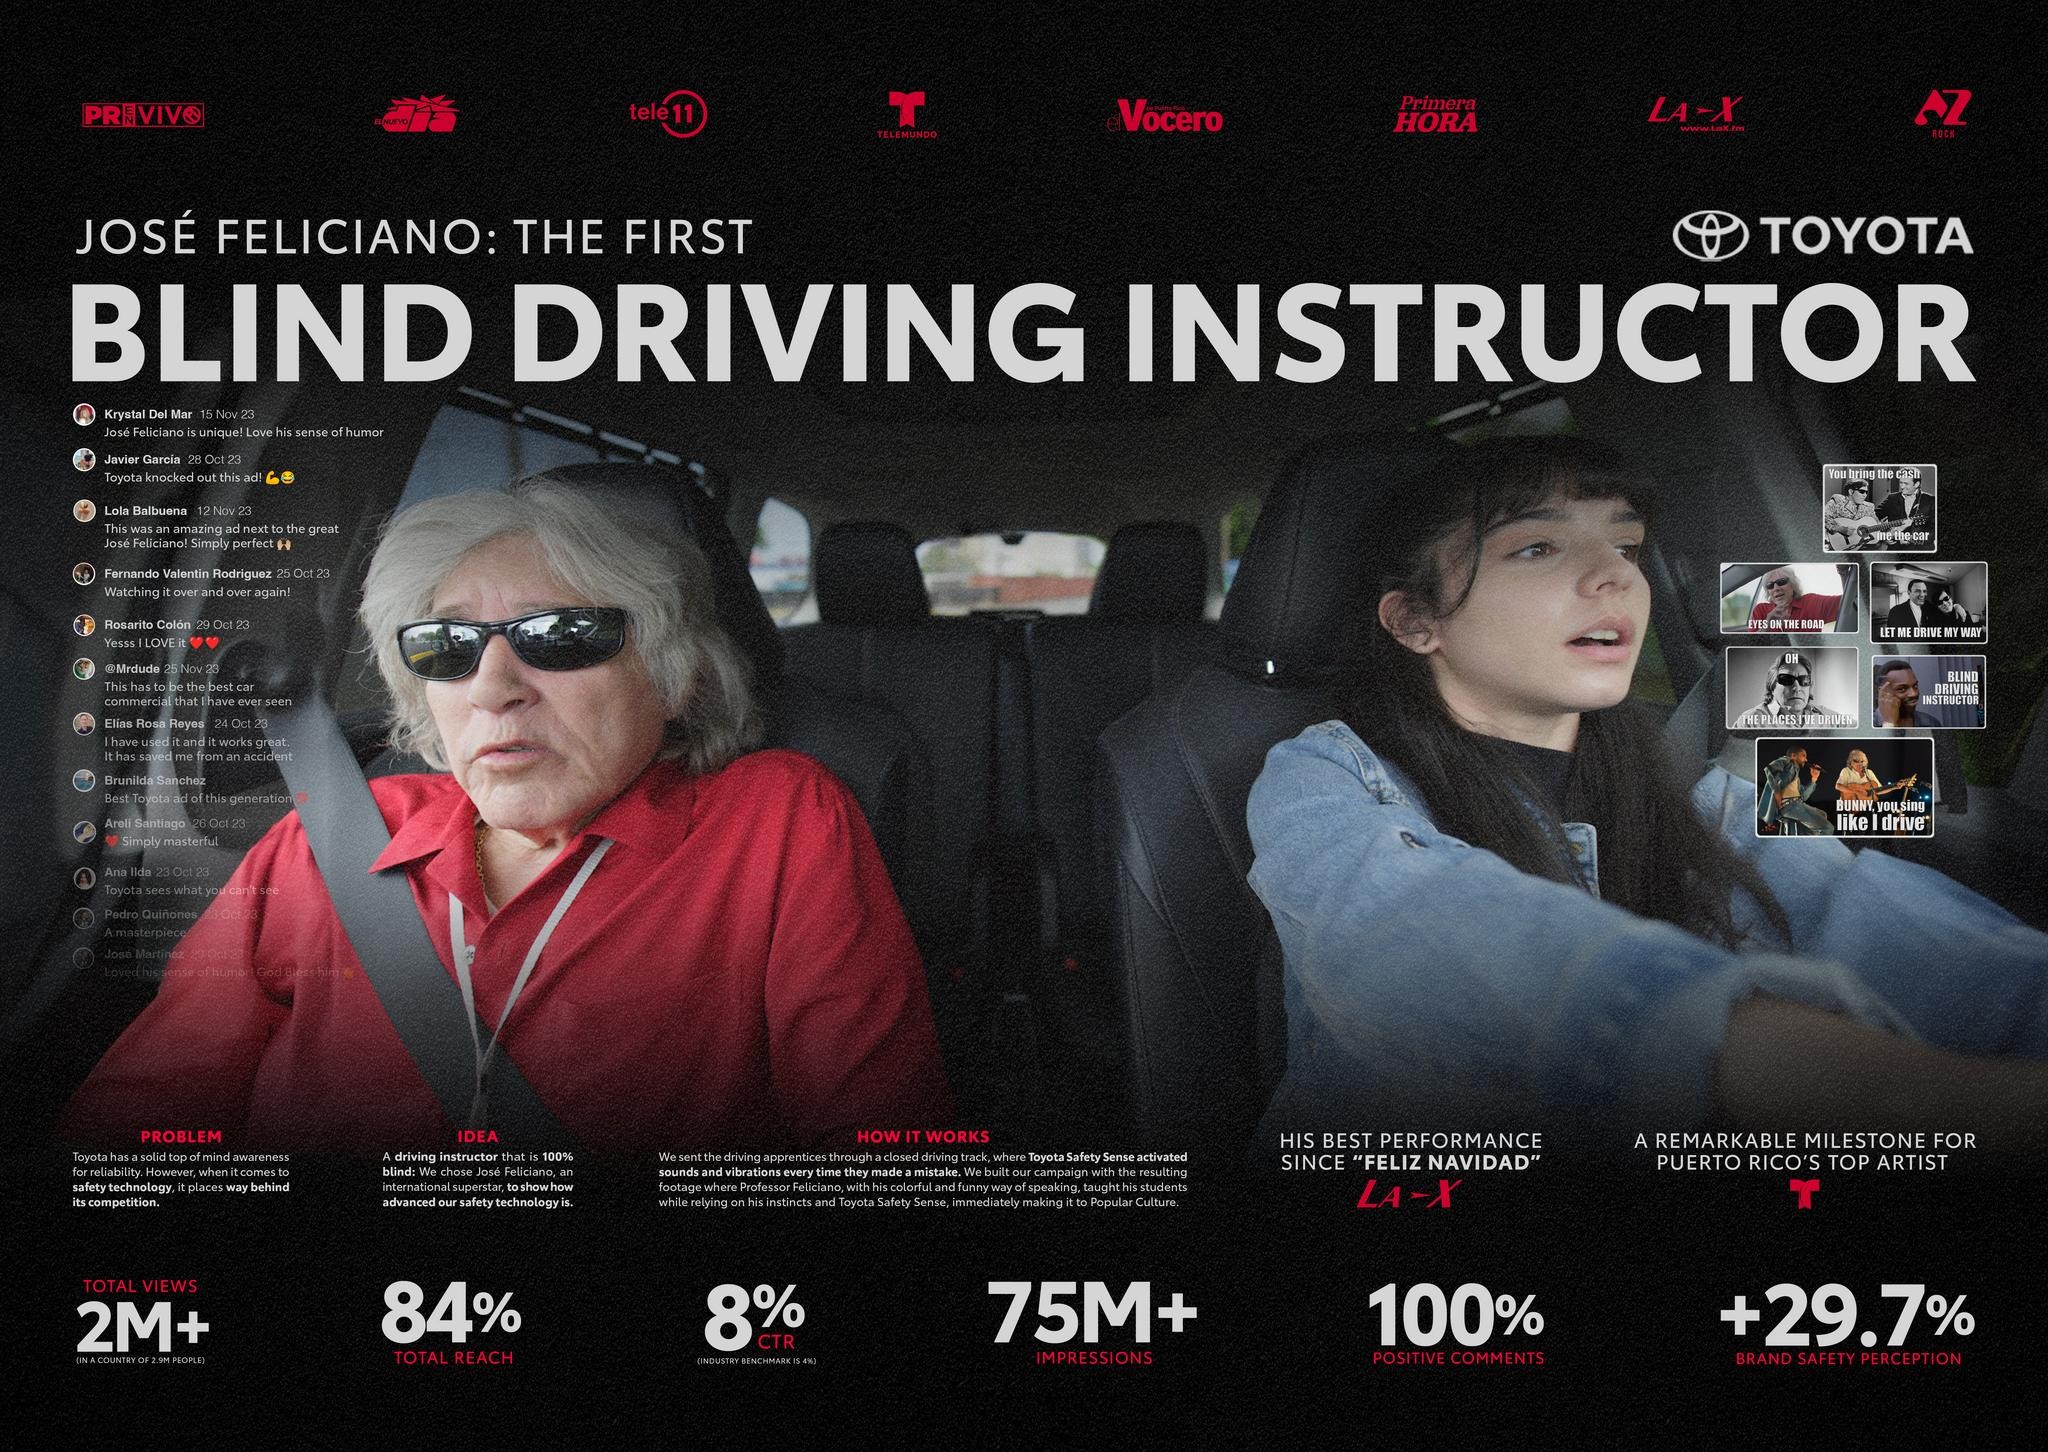 José Feliciano: The First Blind Driver Instructor